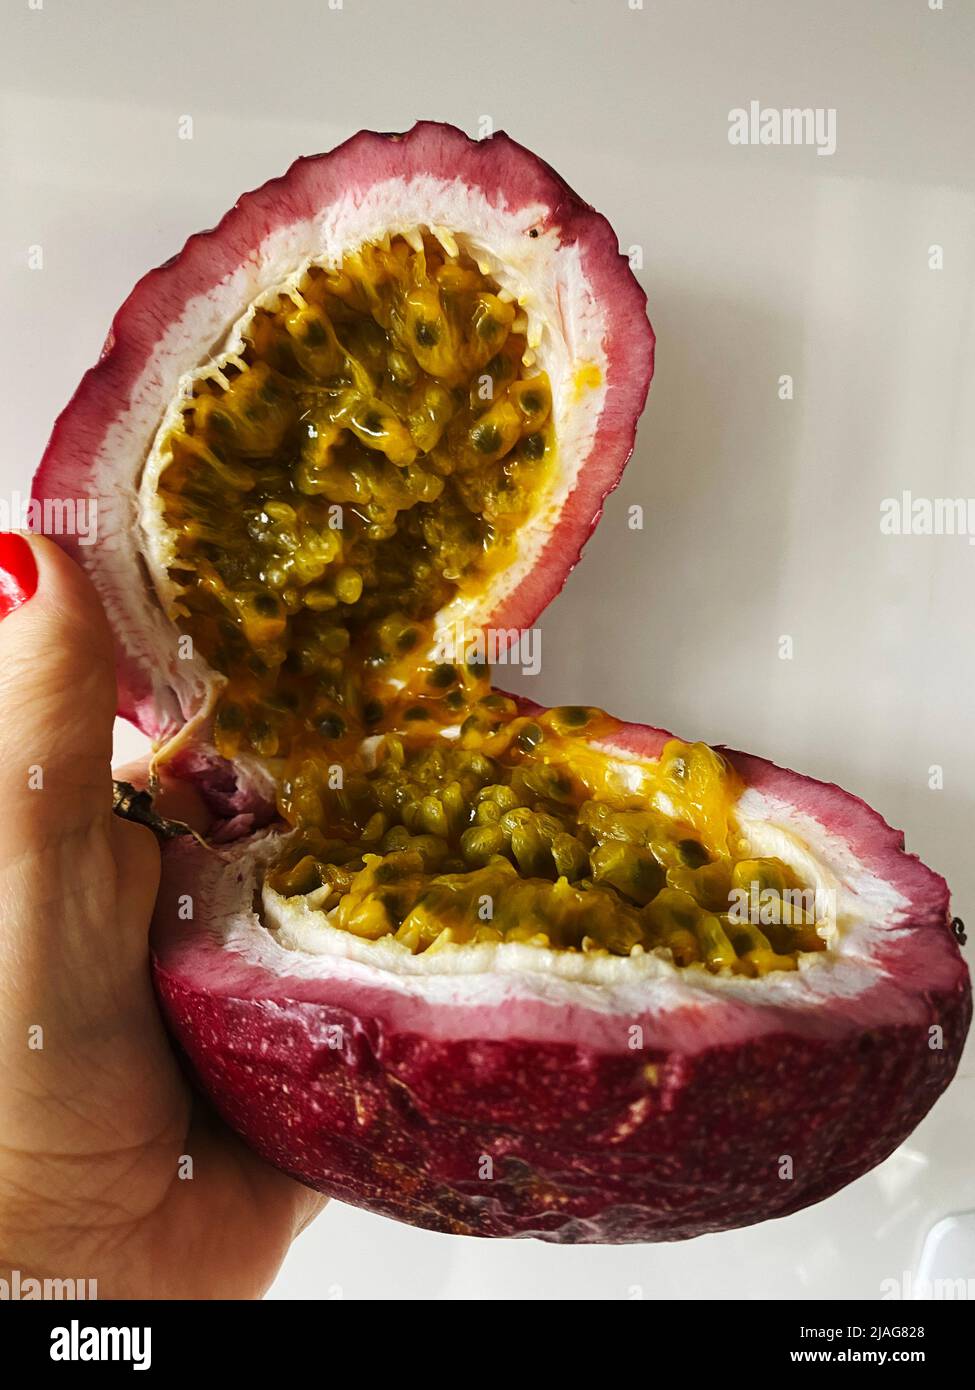 The passion fruit fruit, very popular in Brazil, intended for making sweets and juices. An exotic ingredient in many menus. Stock Photo